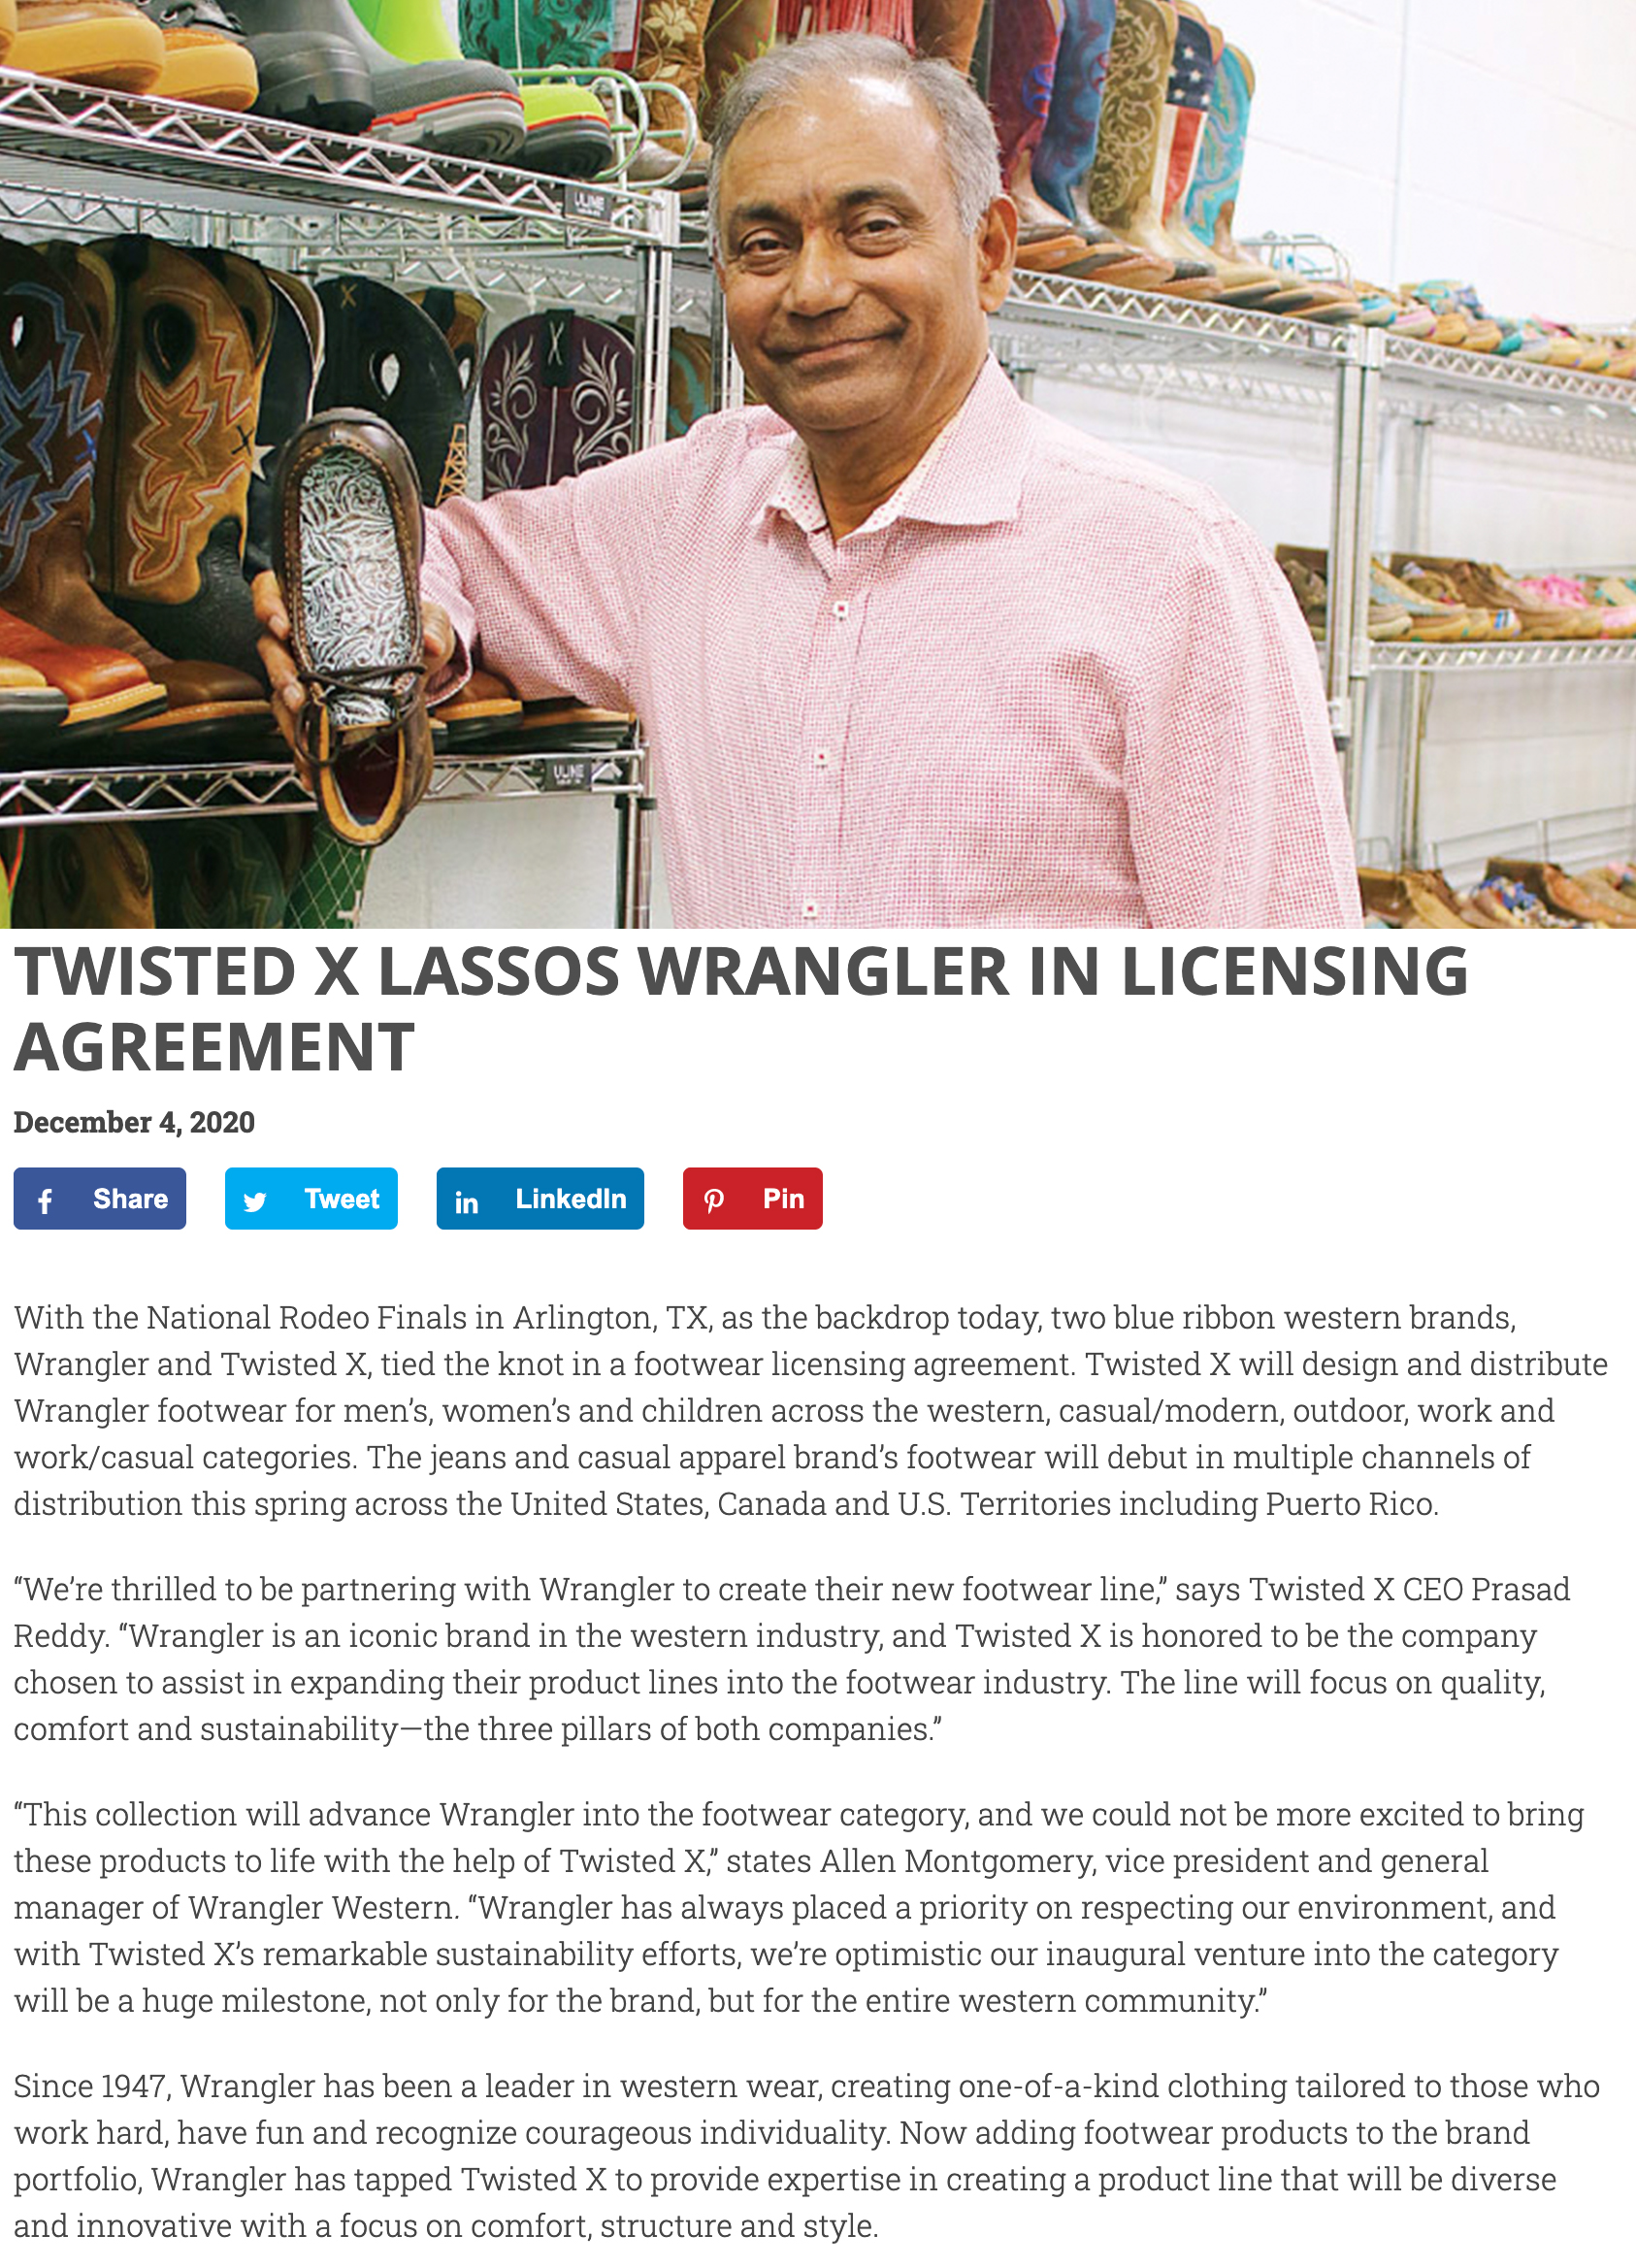 Twisted X Lassos Wrangler in Licensing Agreement